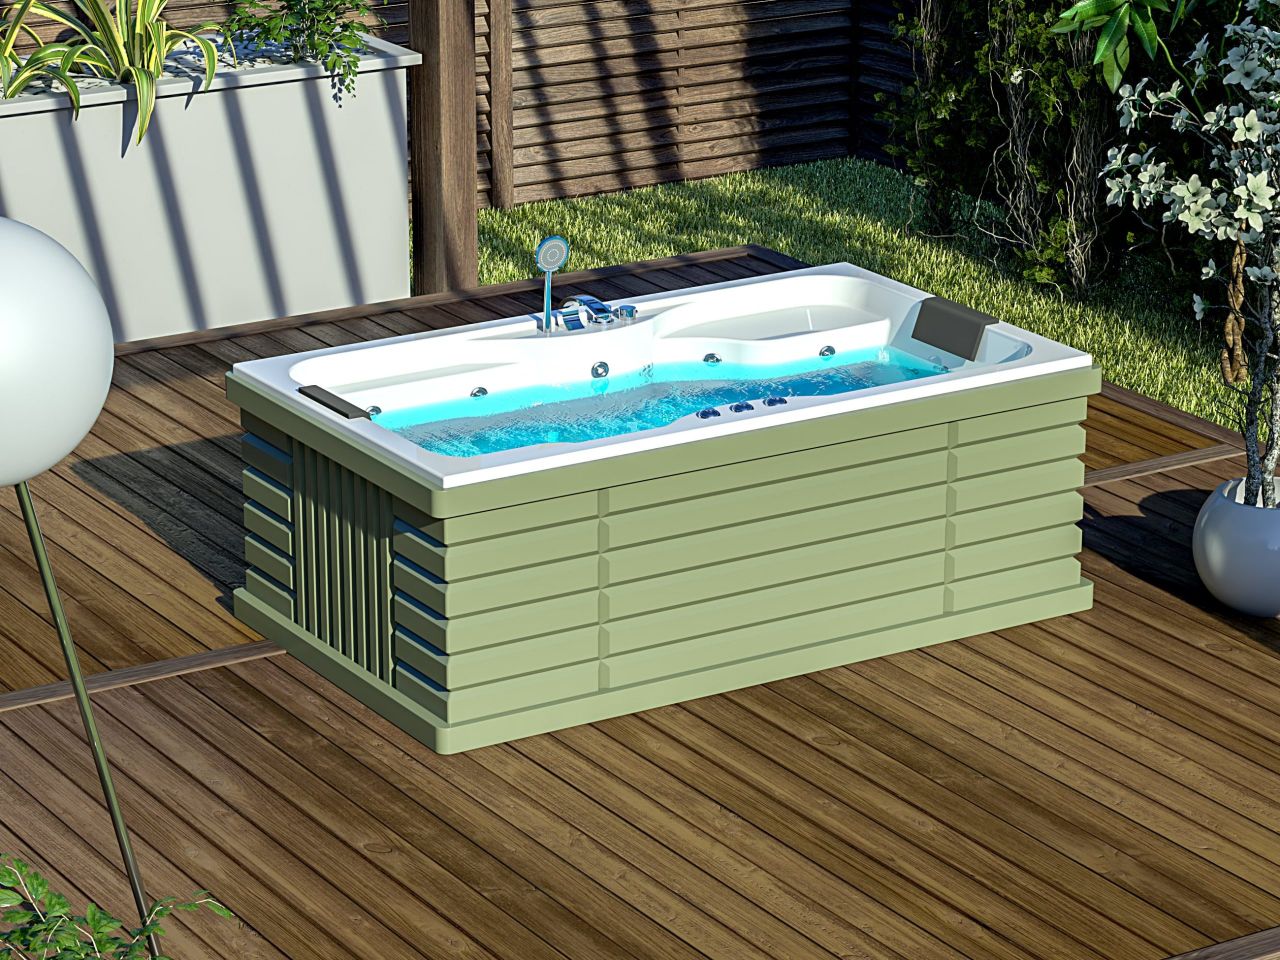 Is Jacuzzi Water Hot or Cold, Does Jacuzzi Heat the Water?